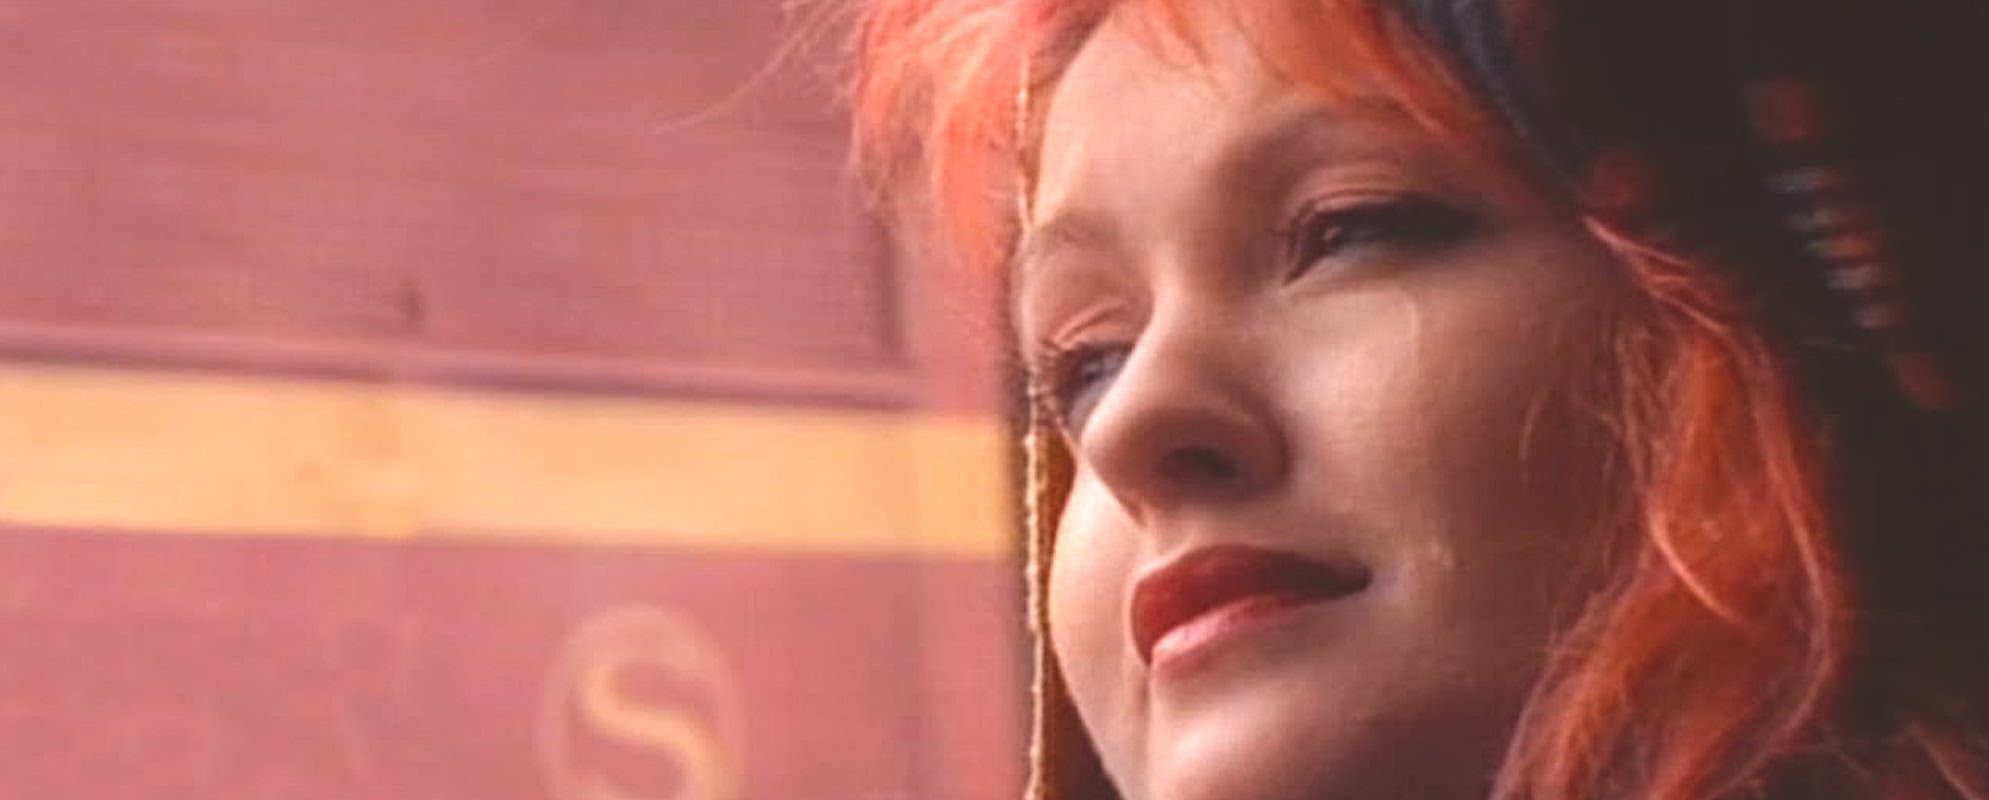 The Meaning Behind Cyndi Lauper’s 1983 Hit “Time After Time”